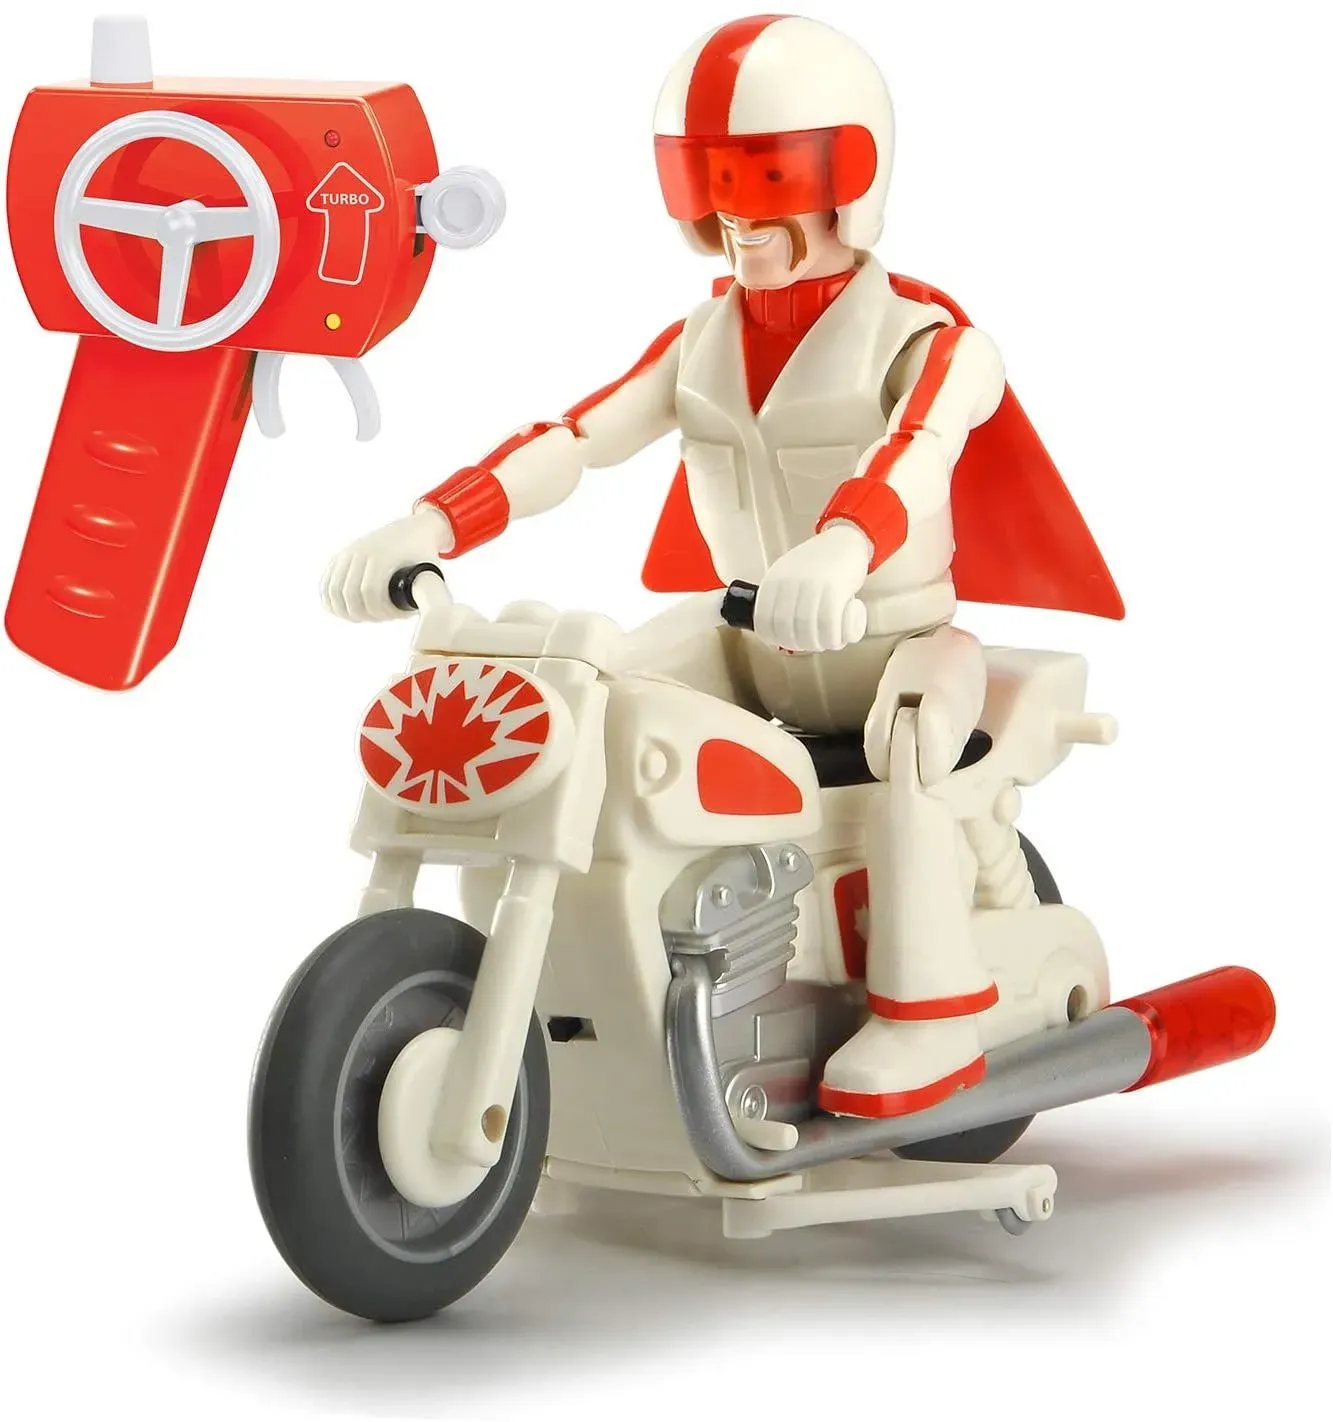 Dickie Toys Duke Caboom Remote Control Toy.